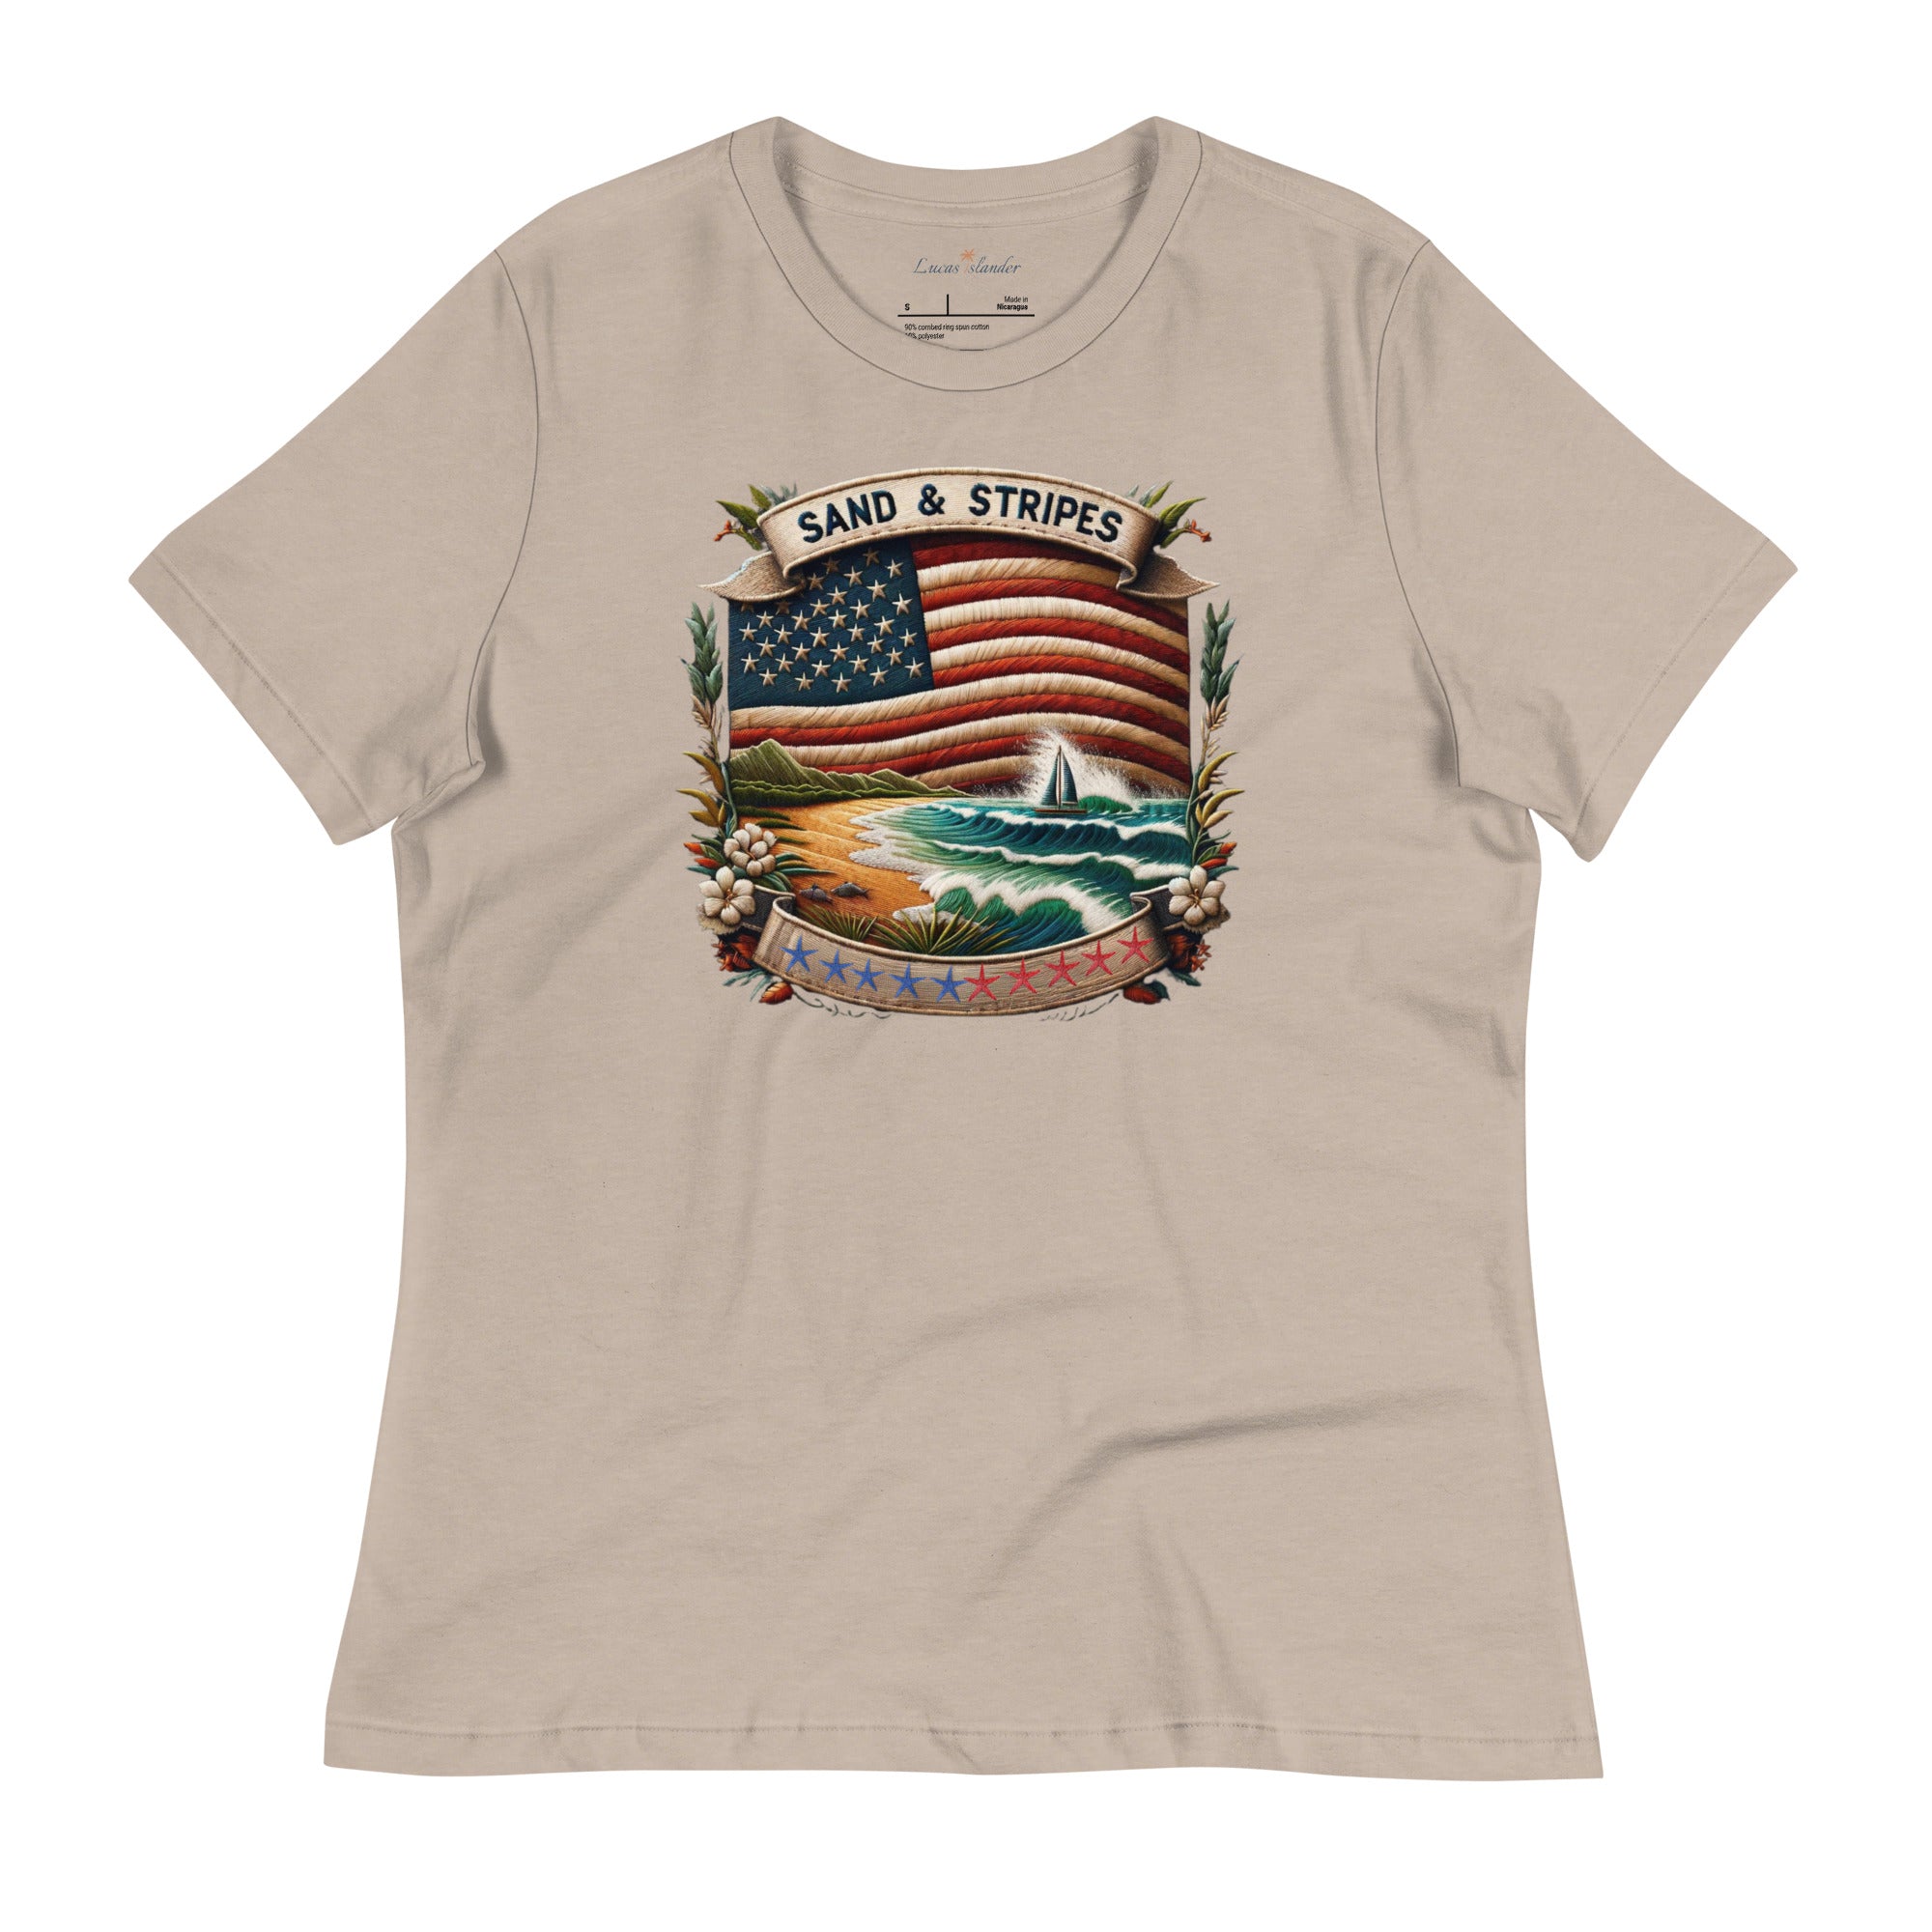 Discover Comfort and Style: Sands & Stripes T-shirt by Lucas Islander Relaxed T-Shirt